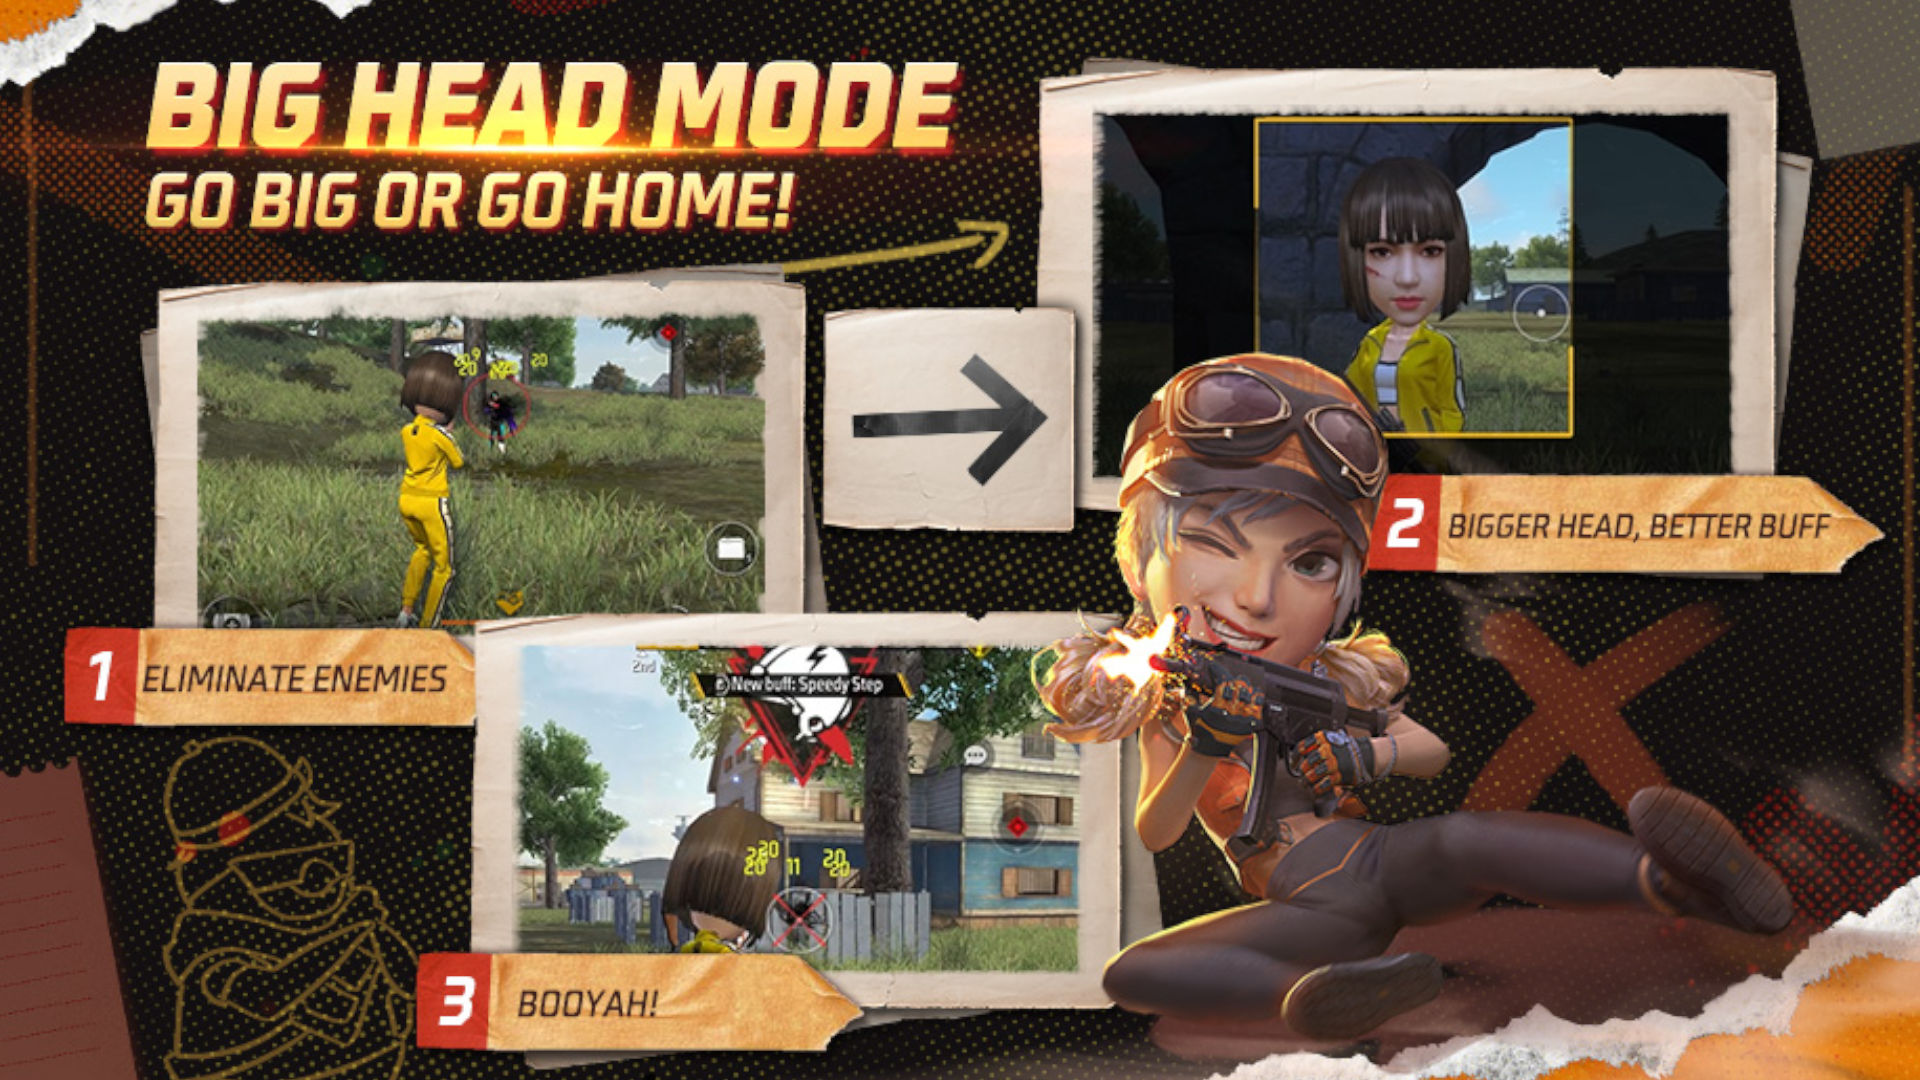 Free Fire Max OB38 Update APK + OBB Download New Version 2023 in 2023